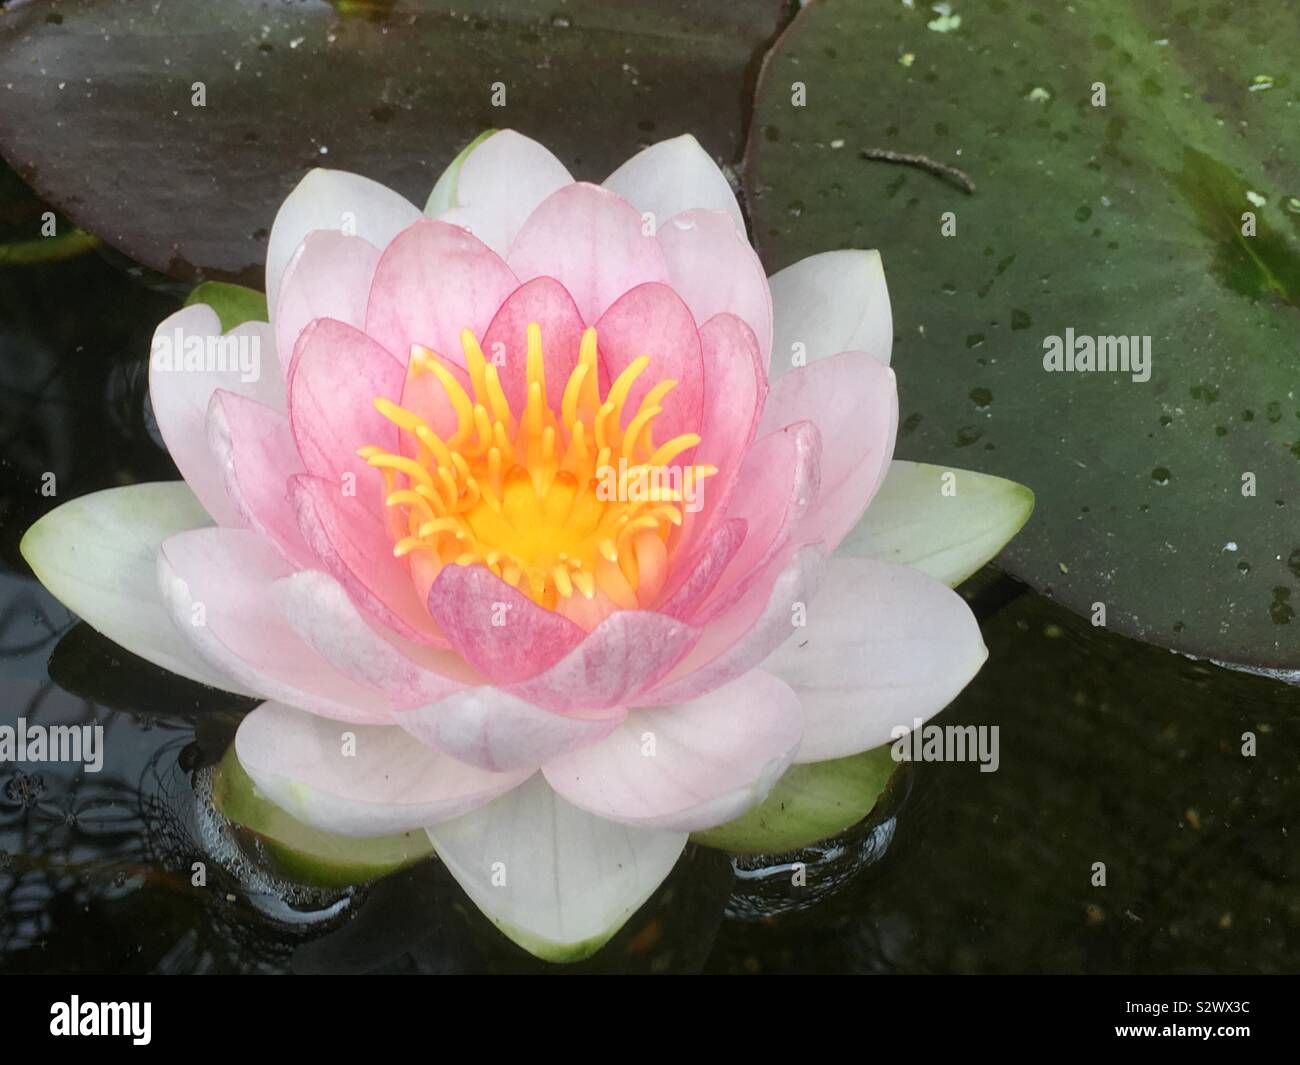 Water lily, Pond life, Garden Pond, Stock Photo